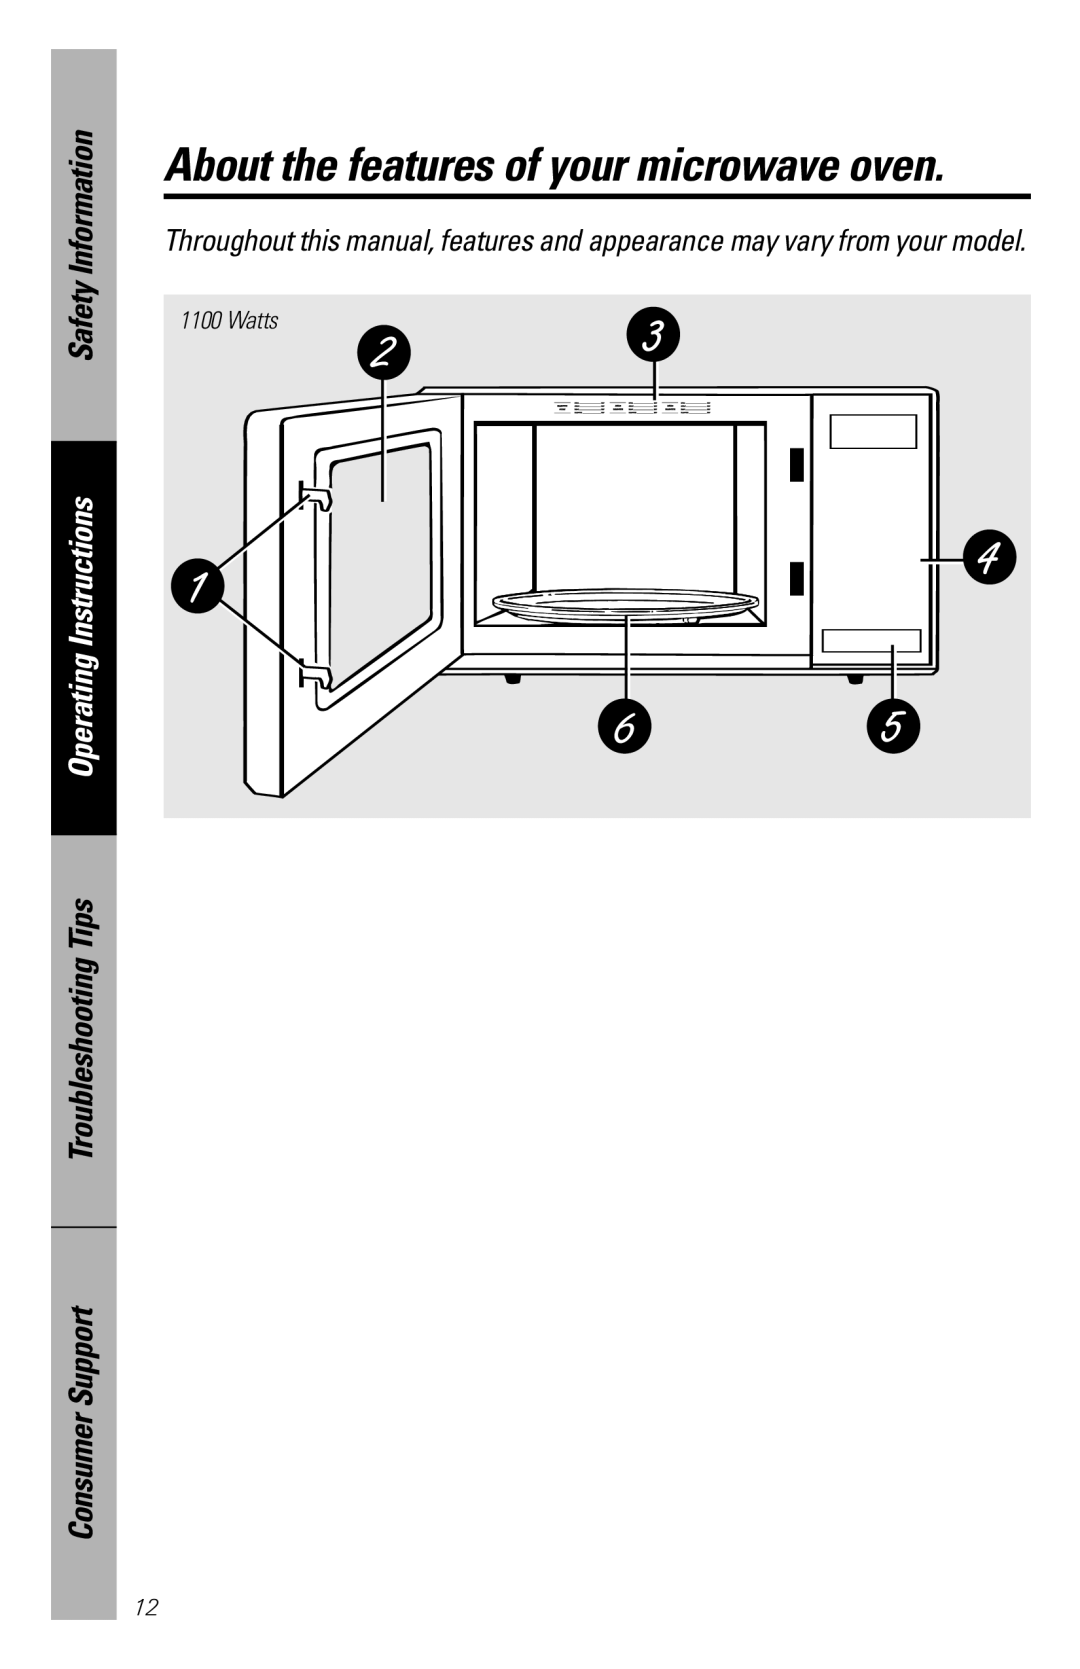 GE WES1130 owner manual About the features of your microwave oven, Safety Information, Operating Instructions, Watts 